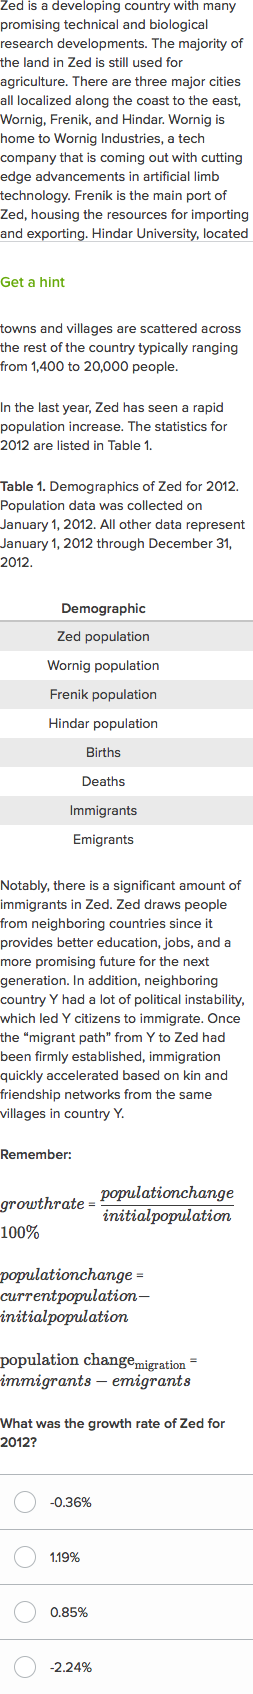 Demographics Table Template from cdn.kastatic.org